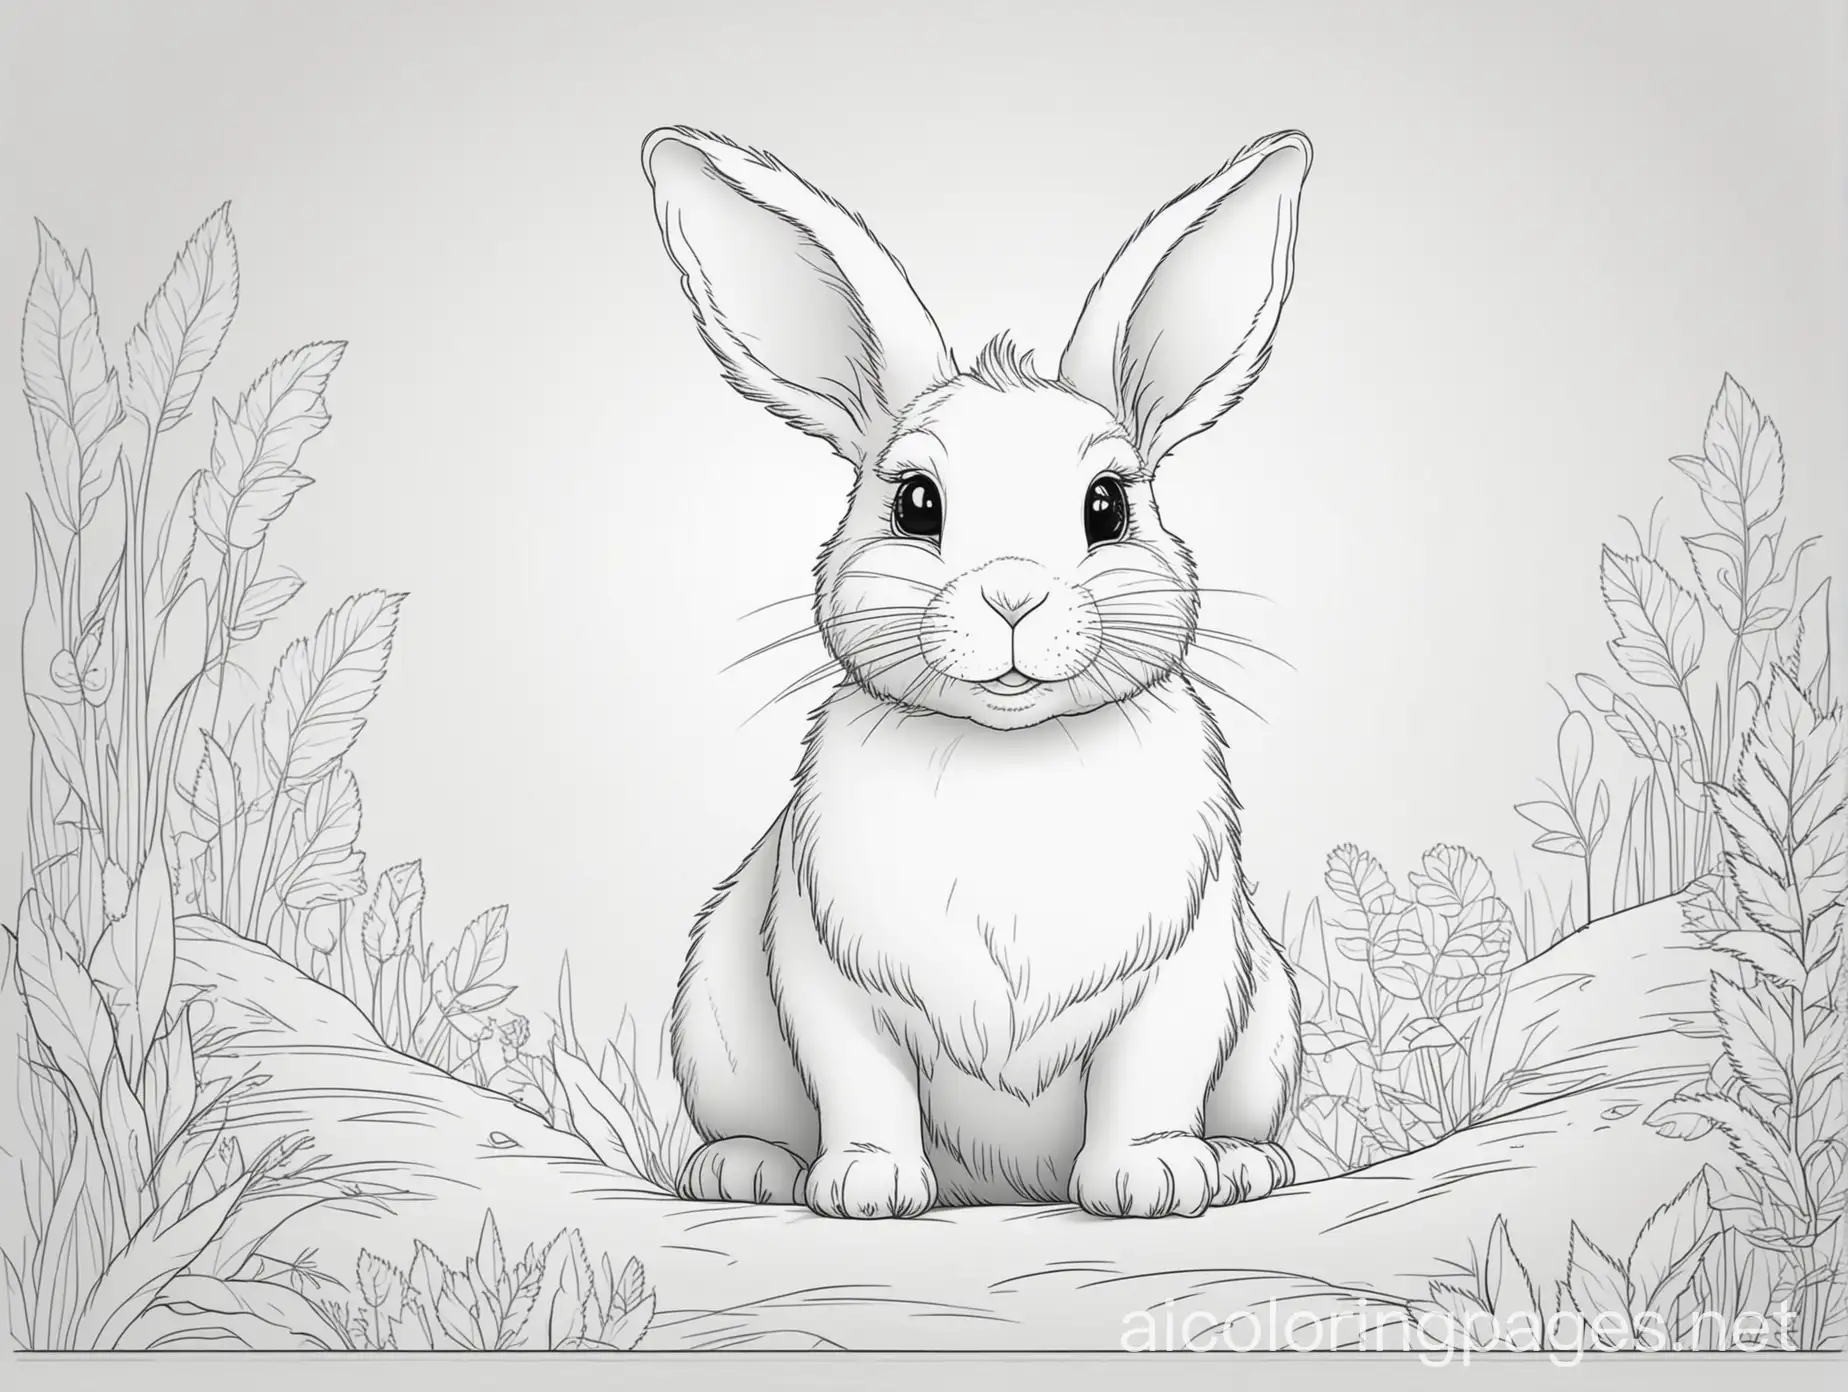 Rabbit with background, Coloring Page, black and white, line art, white background, Simplicity, Ample White Space. The background of the coloring page is plain white to make it easy for young children to color within the lines. The outlines of all the subjects are easy to distinguish, making it simple for kids to color without too much difficulty